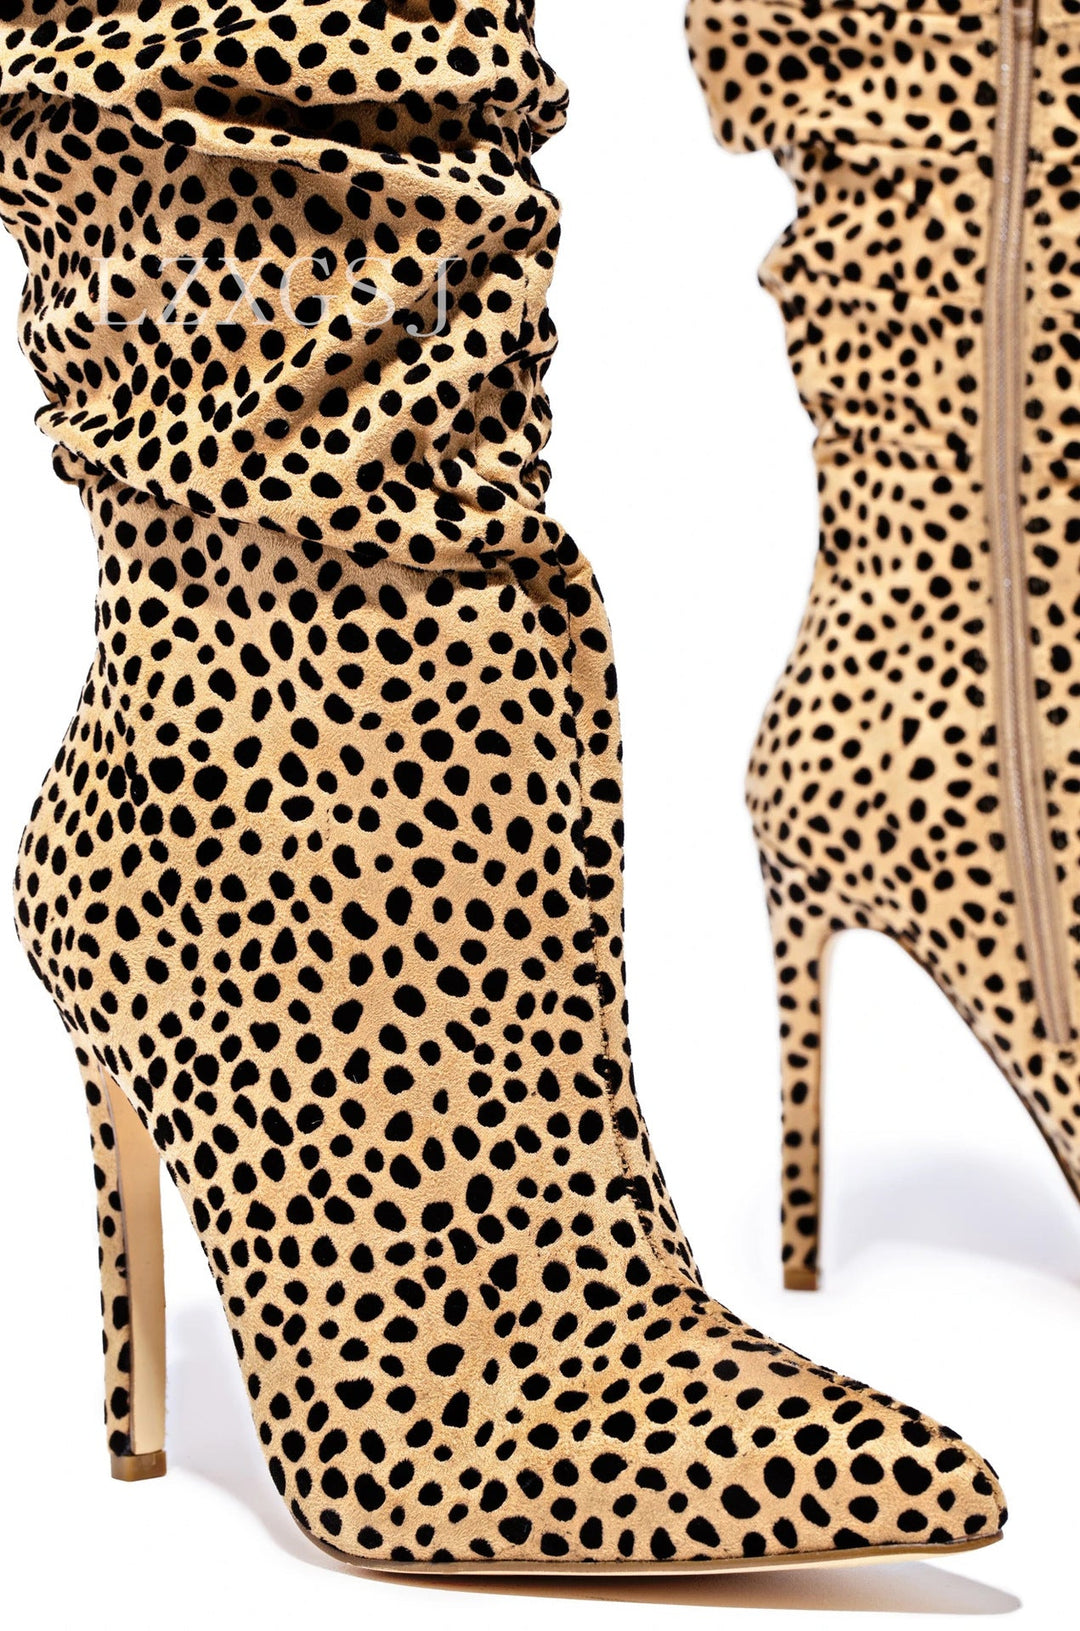 Female's leopard pattern stiletto high heels knee high slouch boots sexy fashion winter party boots